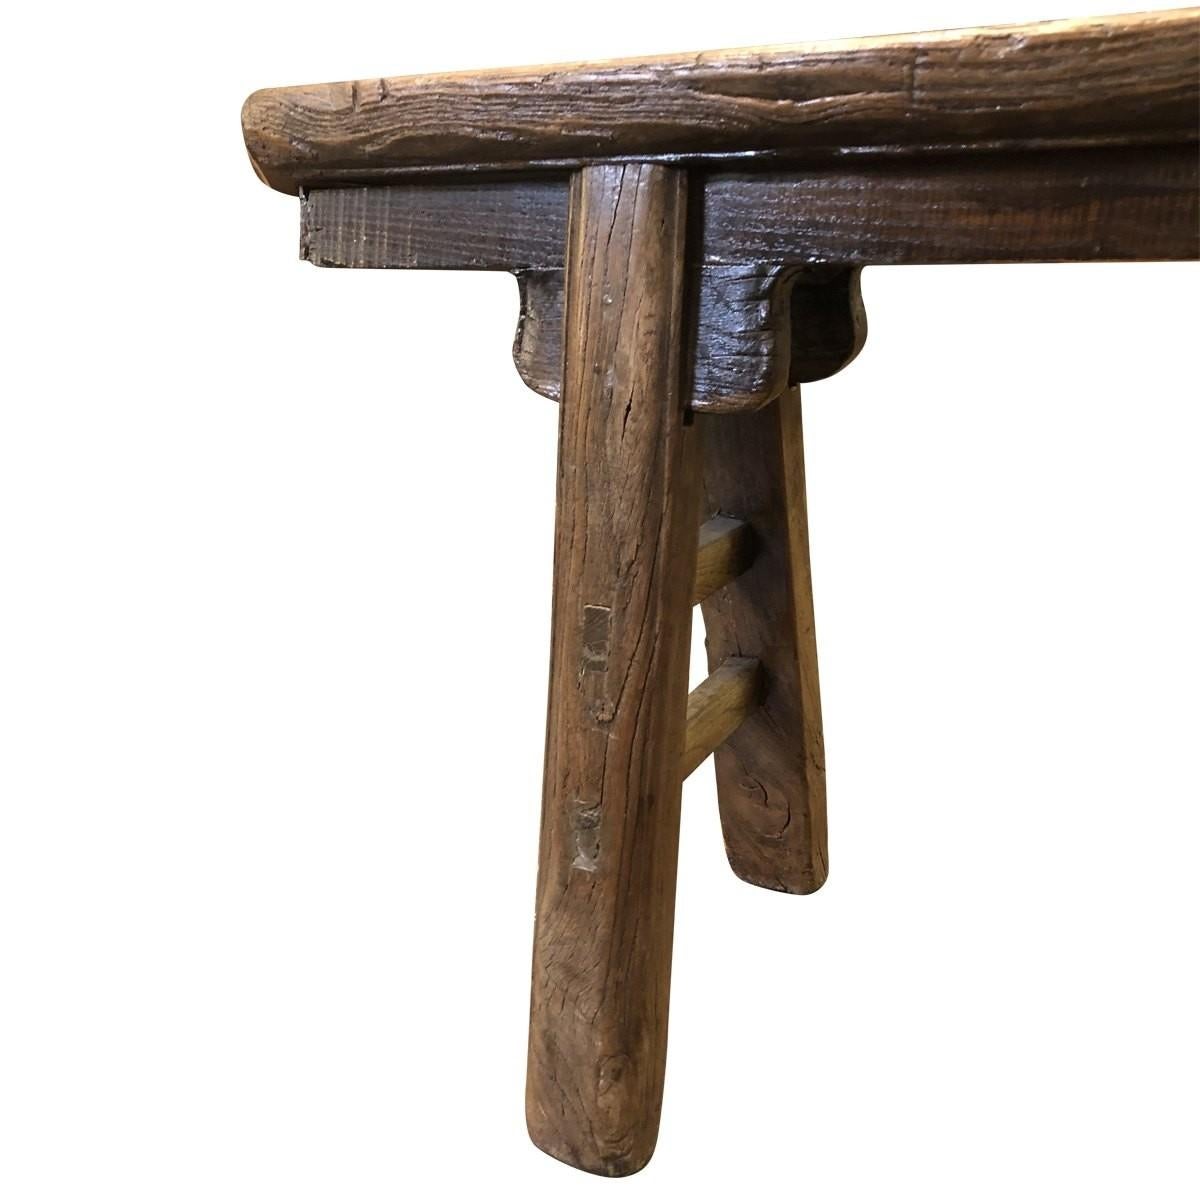 19th Century Rustic Narrow Bench, Chinese